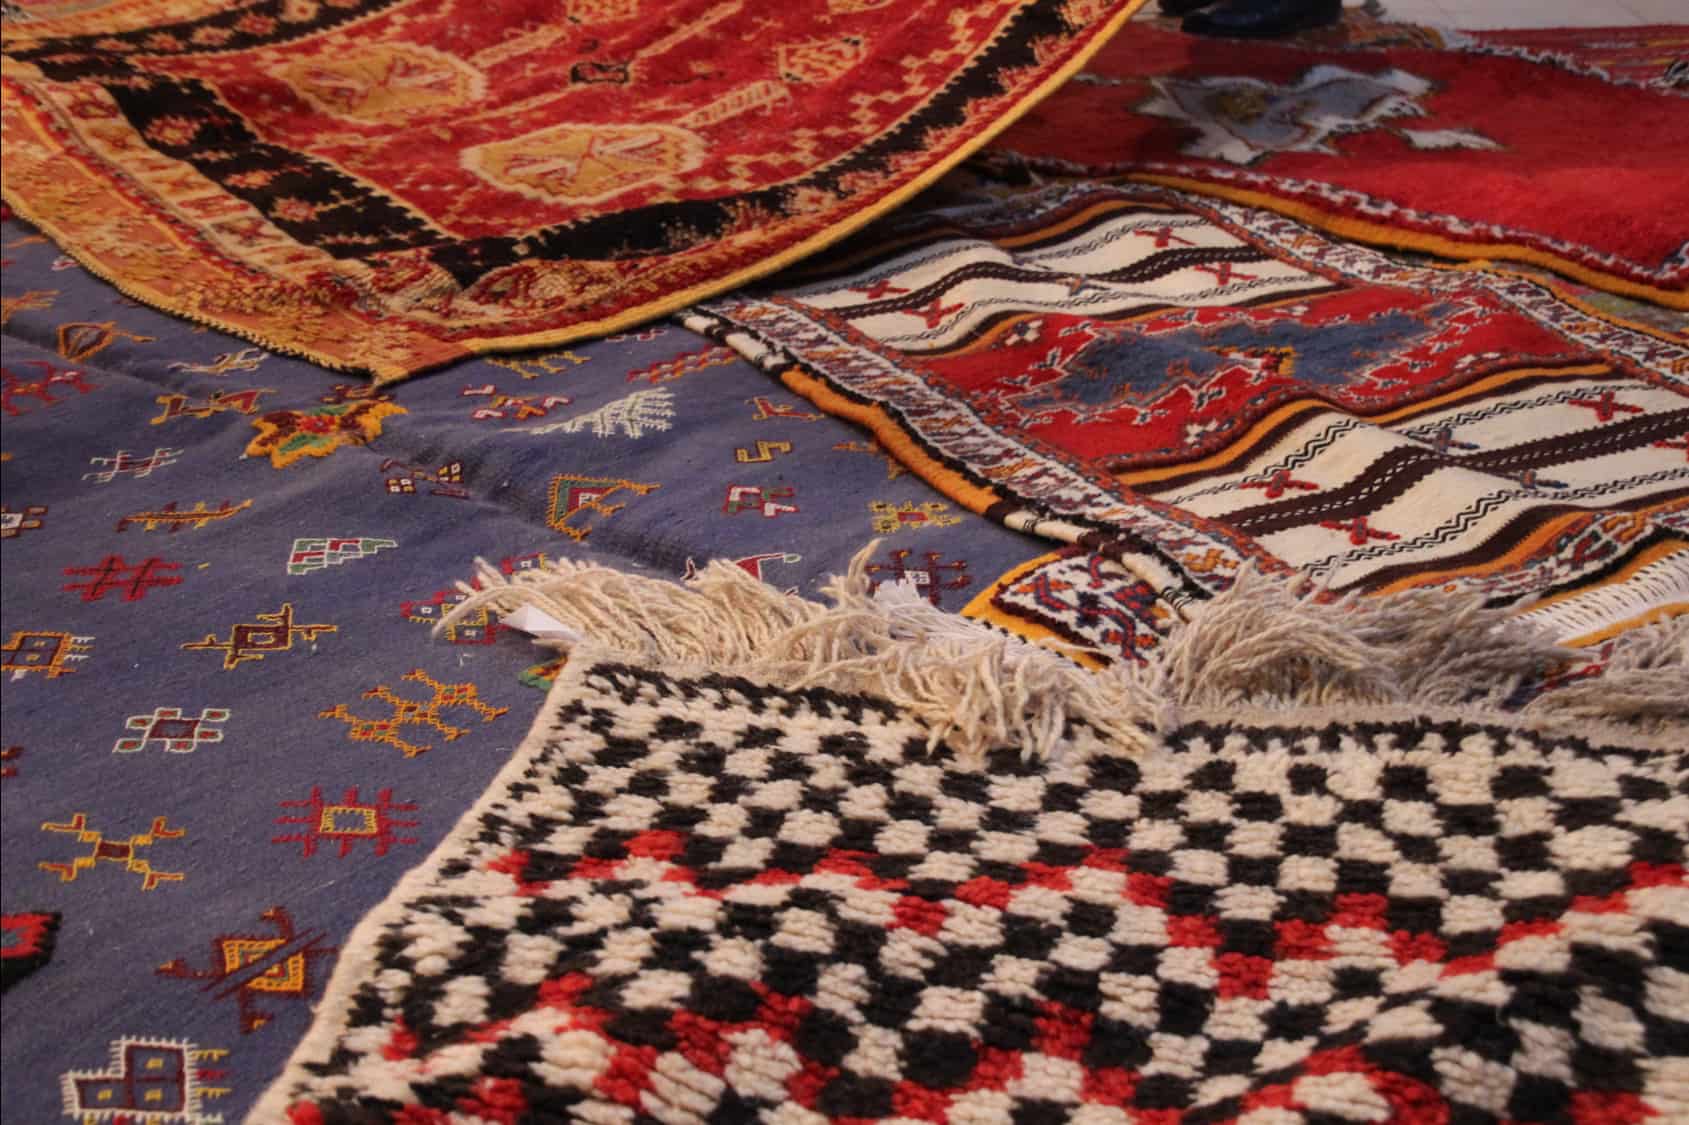 Handcrafted rugs